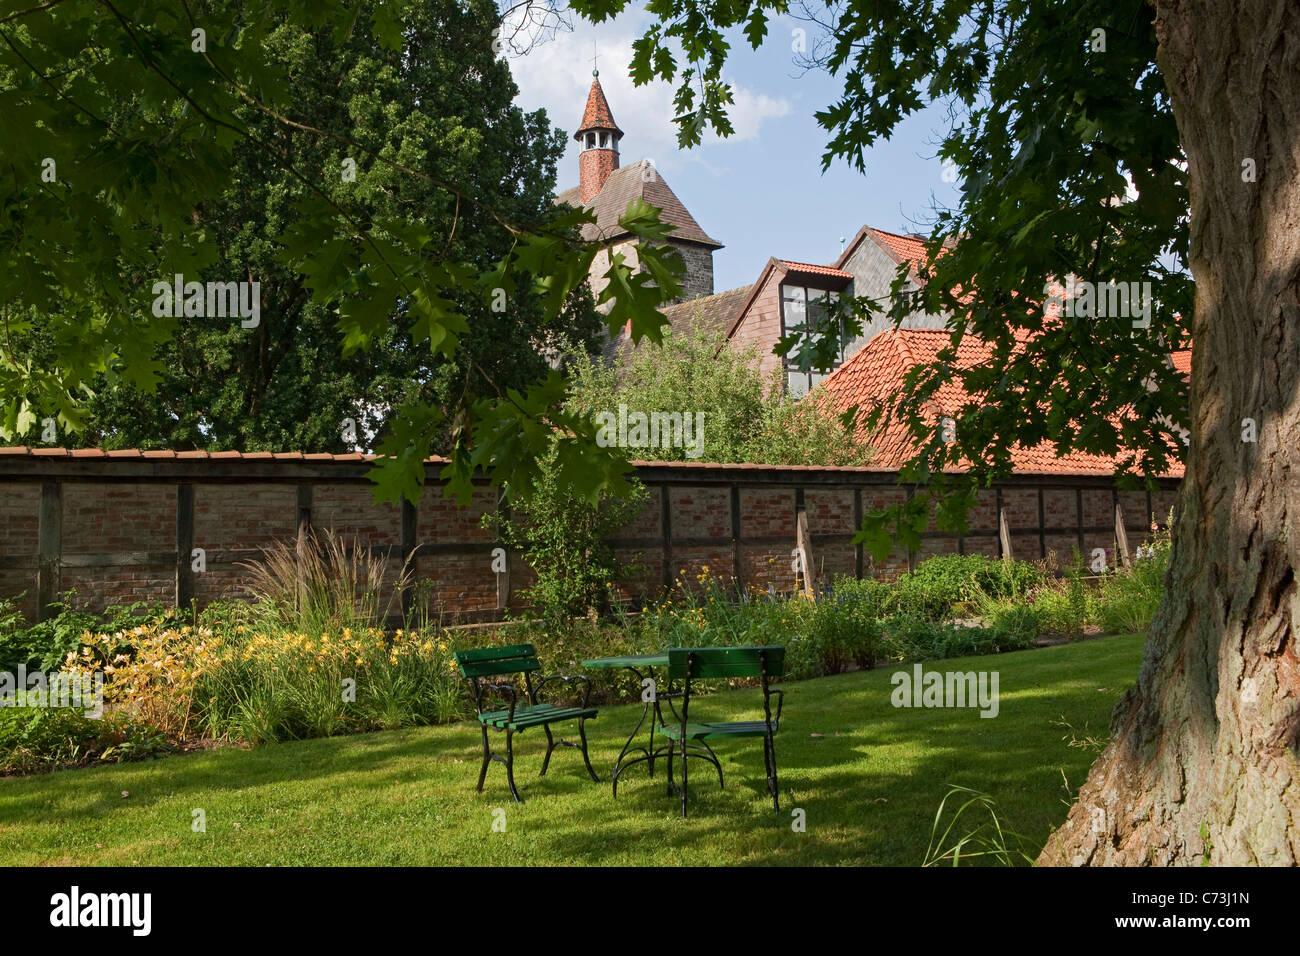 View from the garden of the abbey towards Fischbeck Abbey, Fischbeck, Hessisch Oldendorf, Lower Saxony, Germany Stock Photo